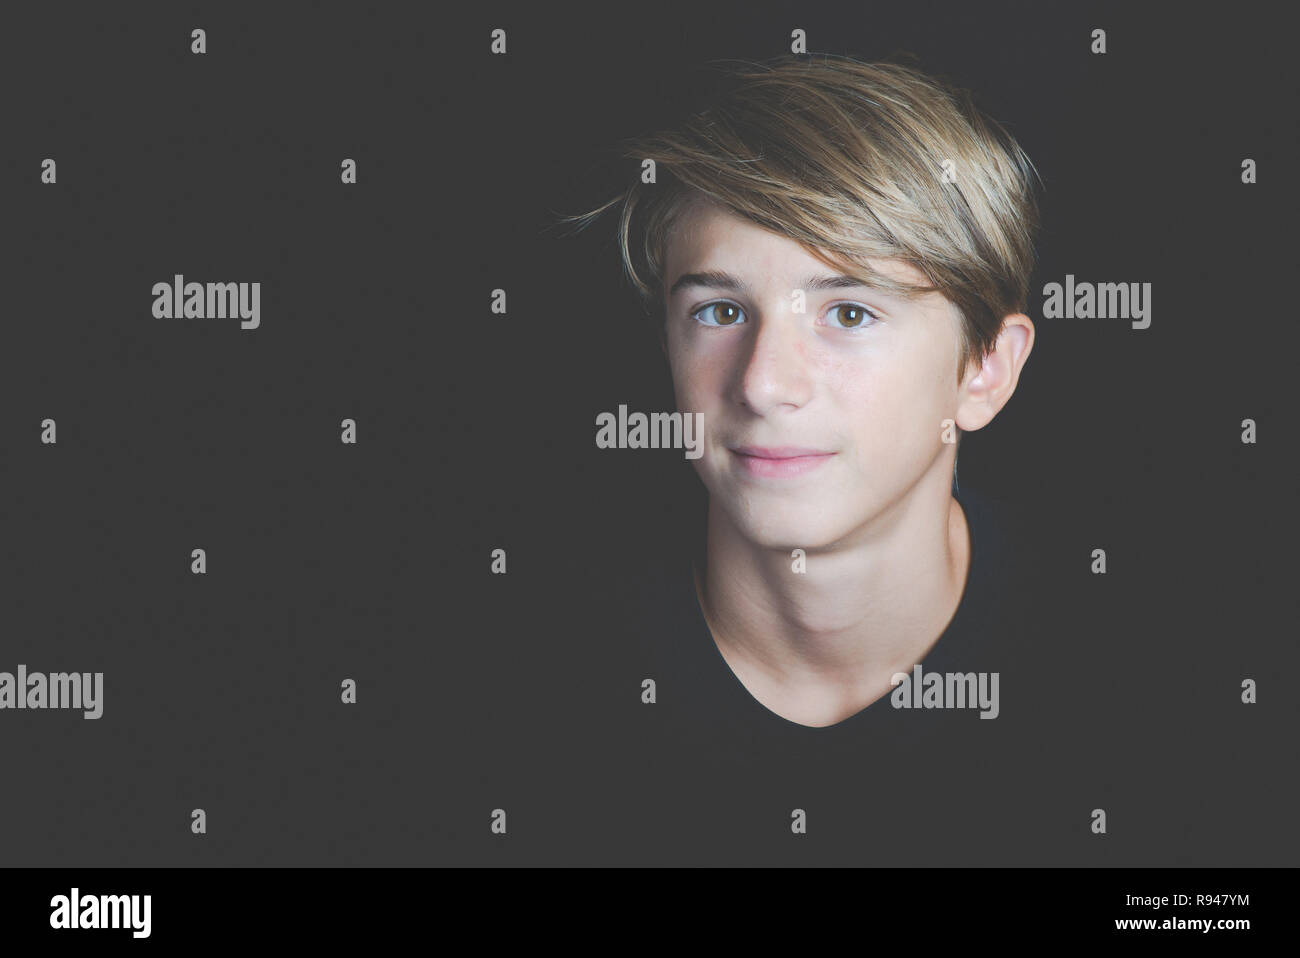 young smiling boy portrait on black background - concept of adolescence whithout problems Stock Photo